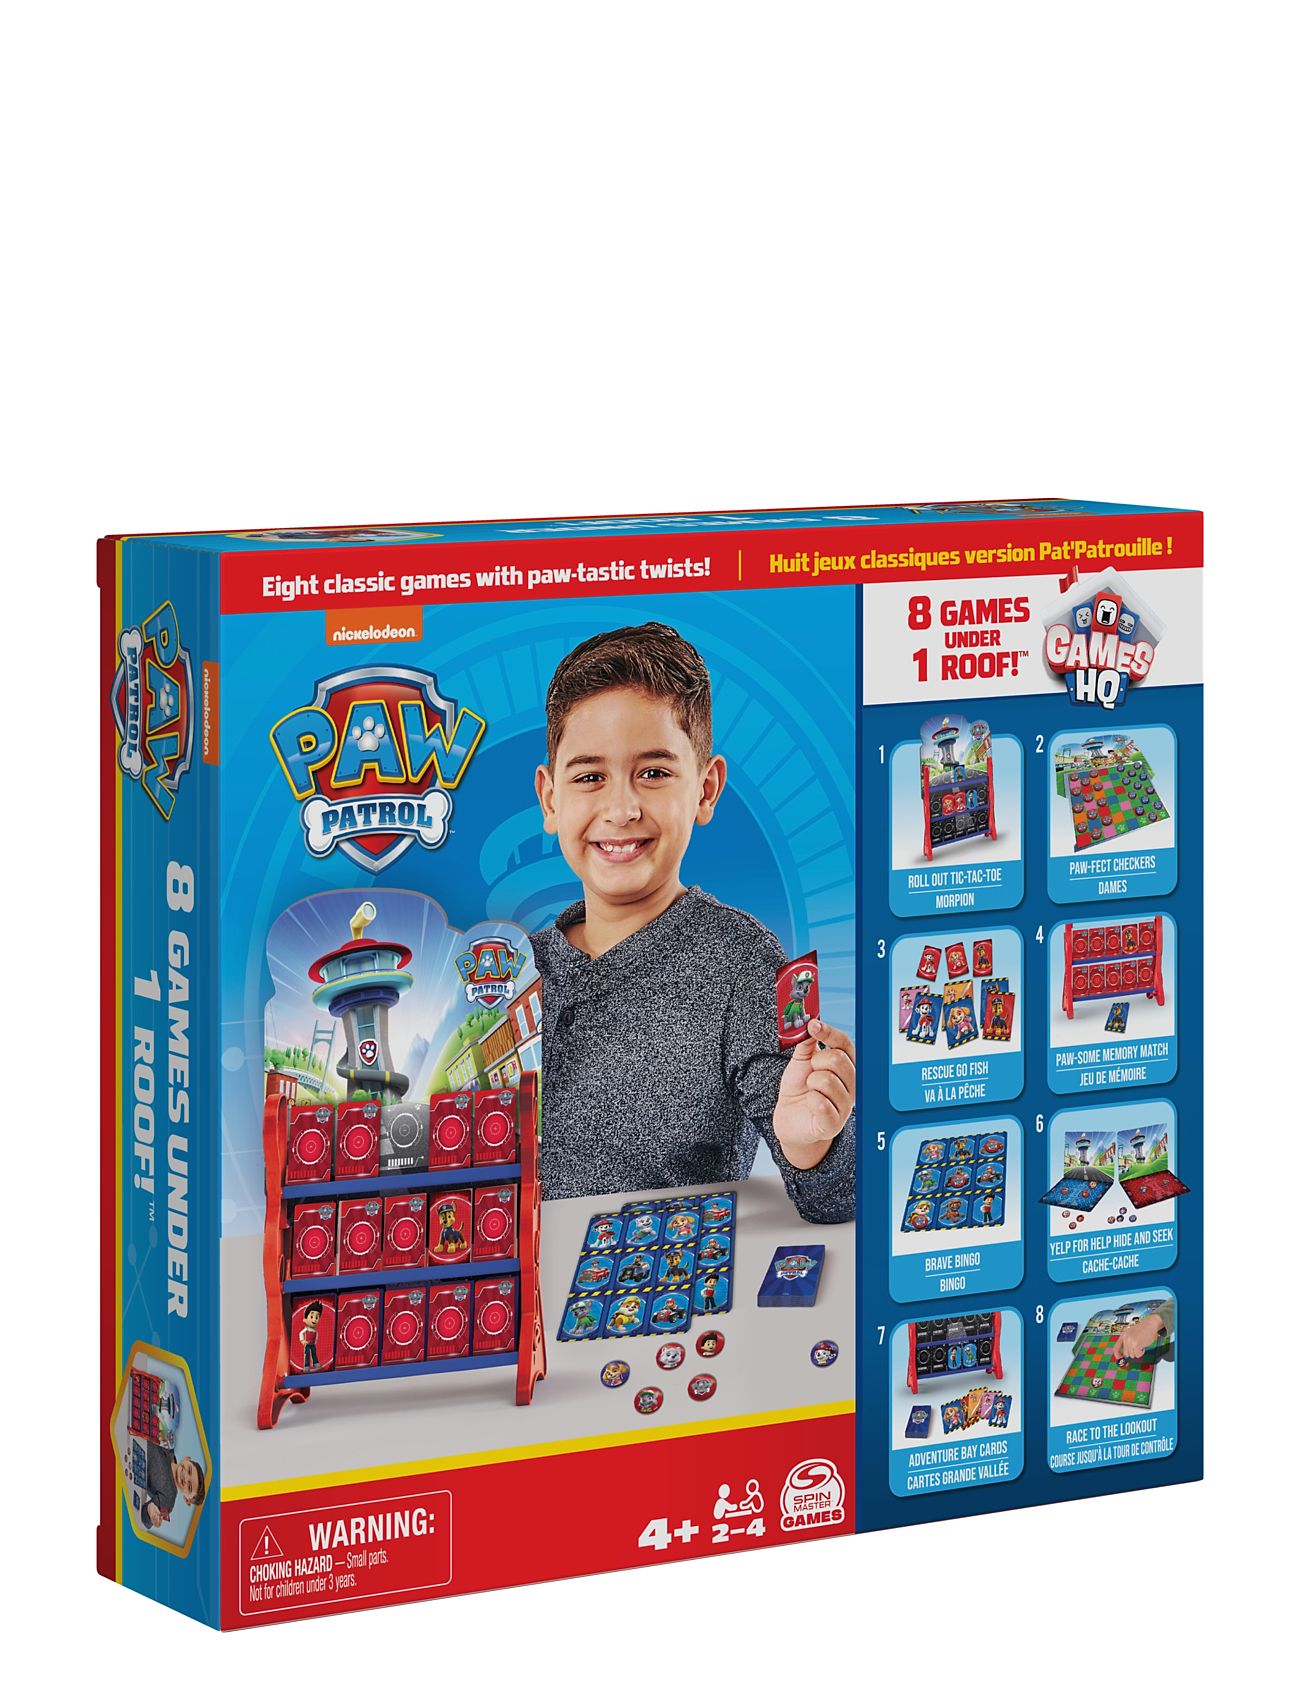 Paw Patrol 8-In-1 Hq Game Toys Puzzles And Games Games Board Games Multi/patterned Paw Patrol